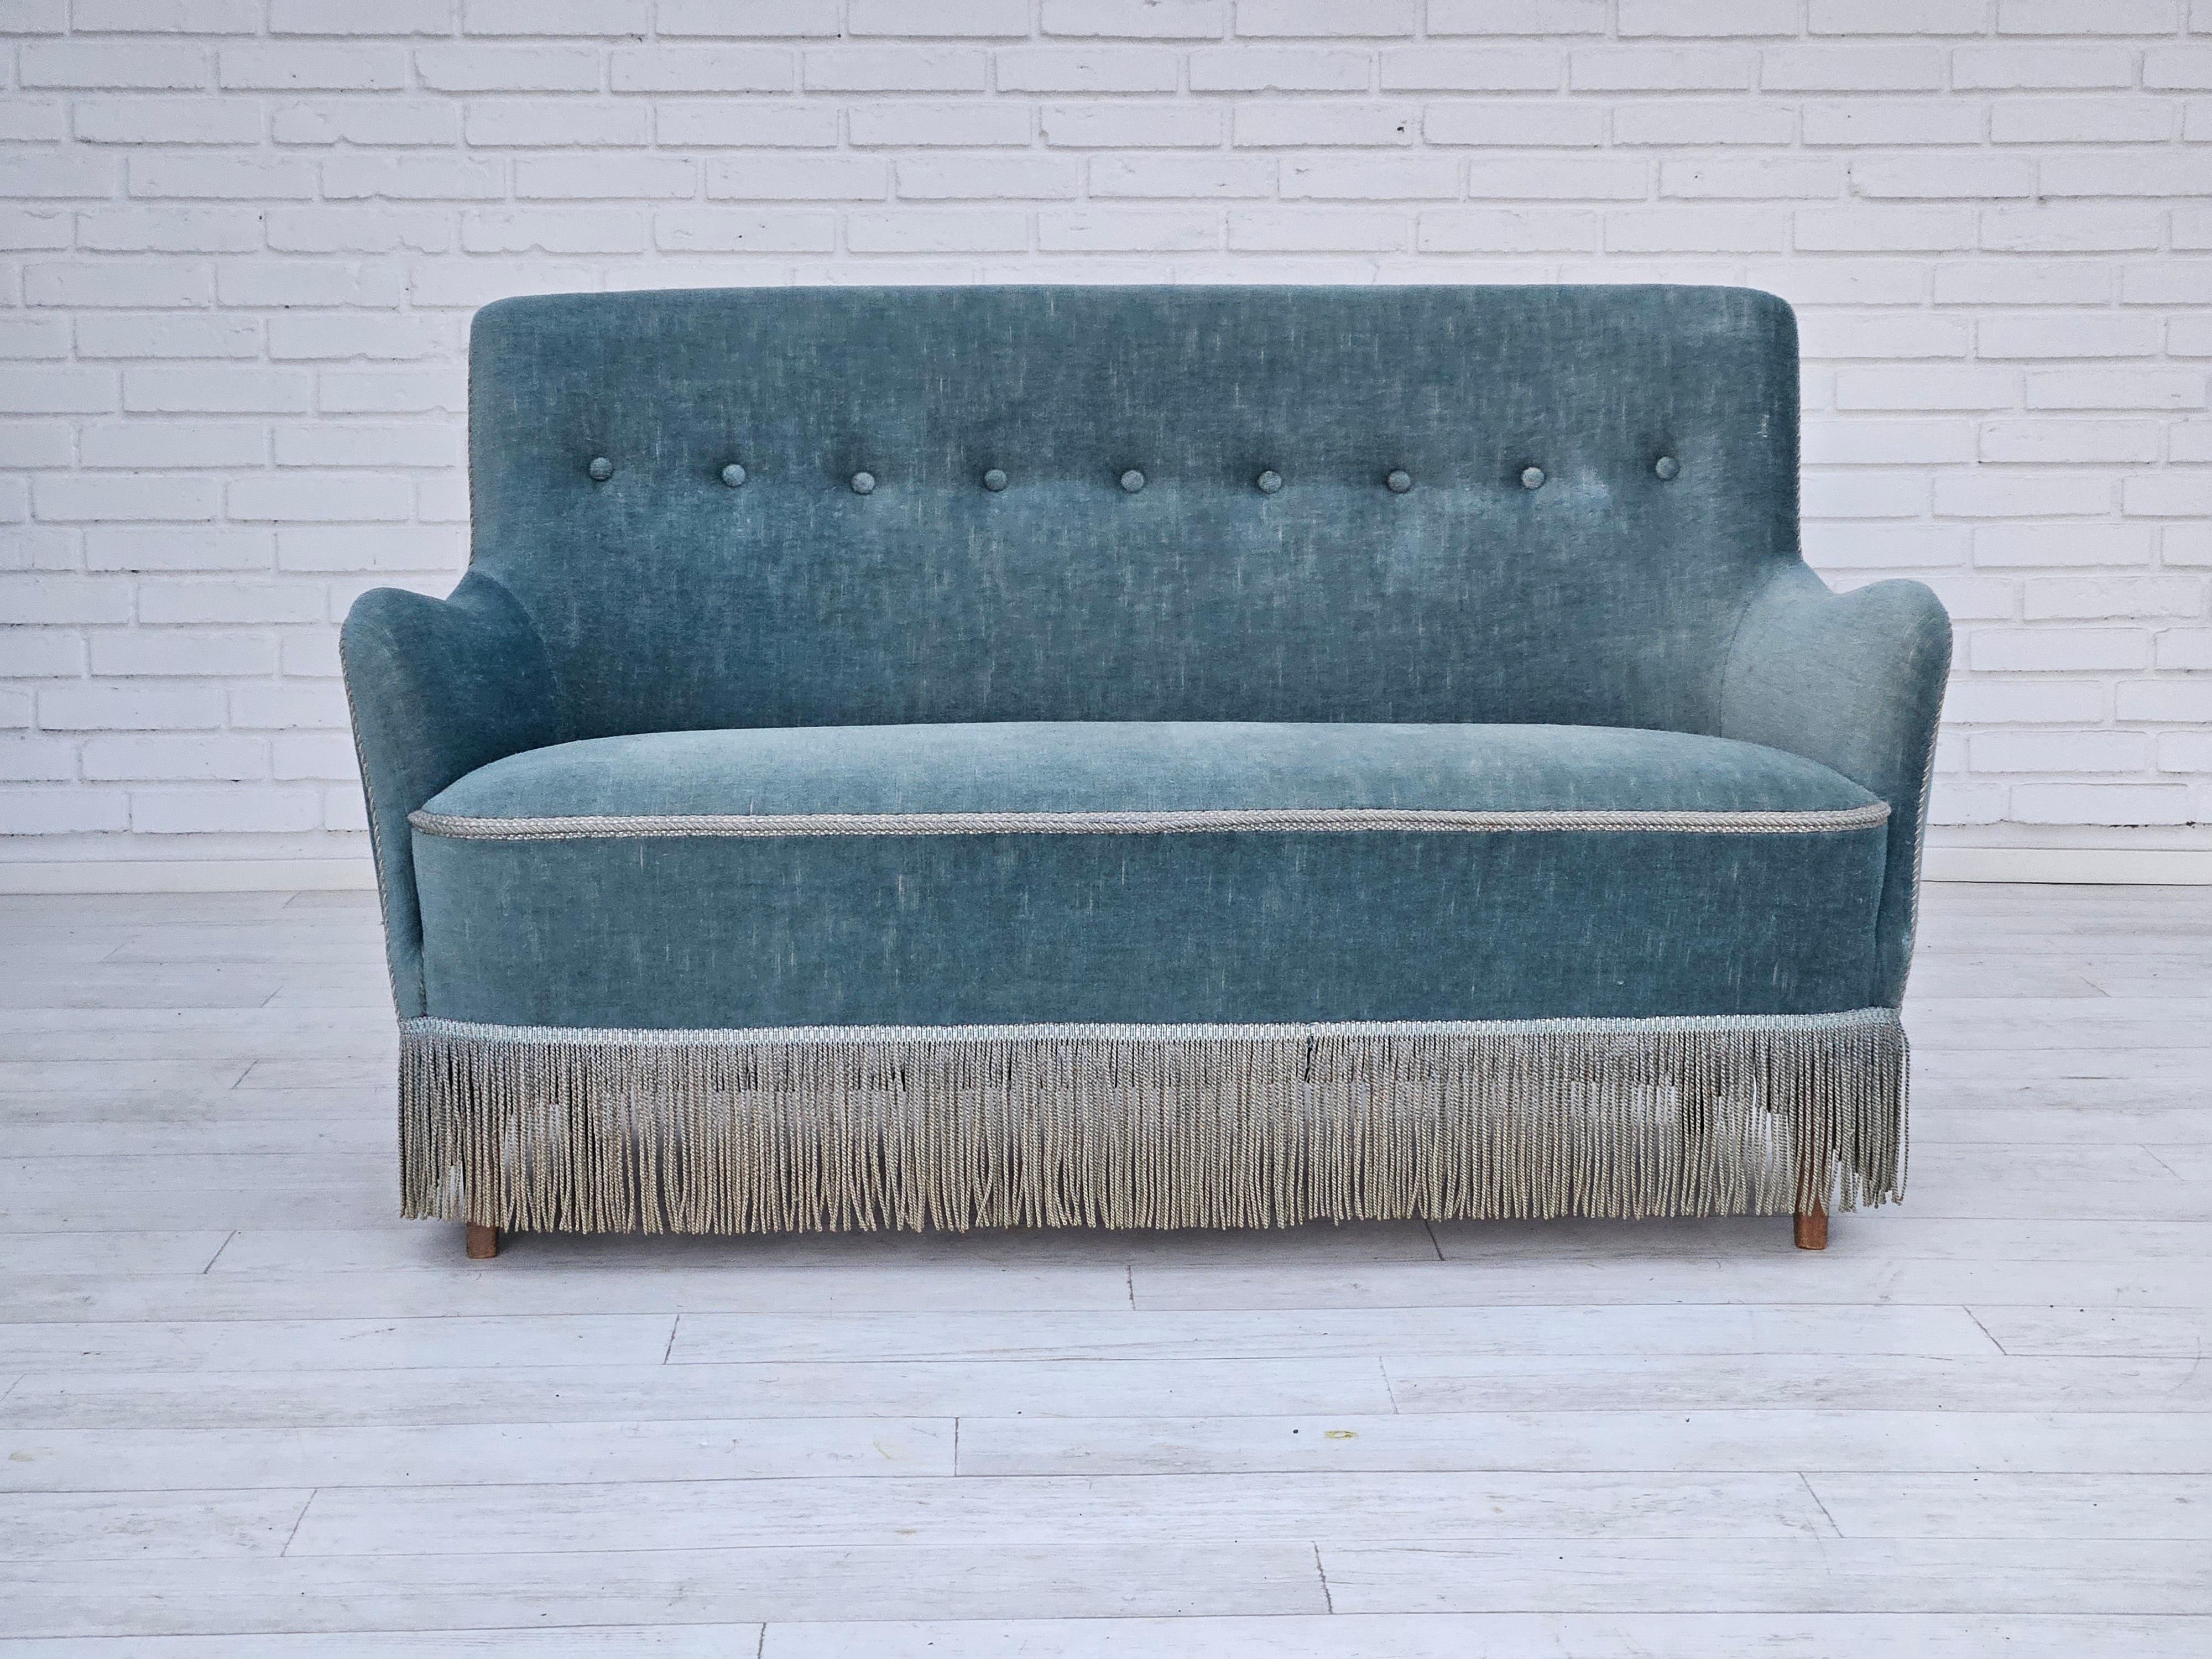 1960s, Danish 2 seater sofa in original light blue velour. No smells and no stains. Beech wood legs, brass springs in the seat. Manufactured by Danish furniture manufacturer in about 1960-65.